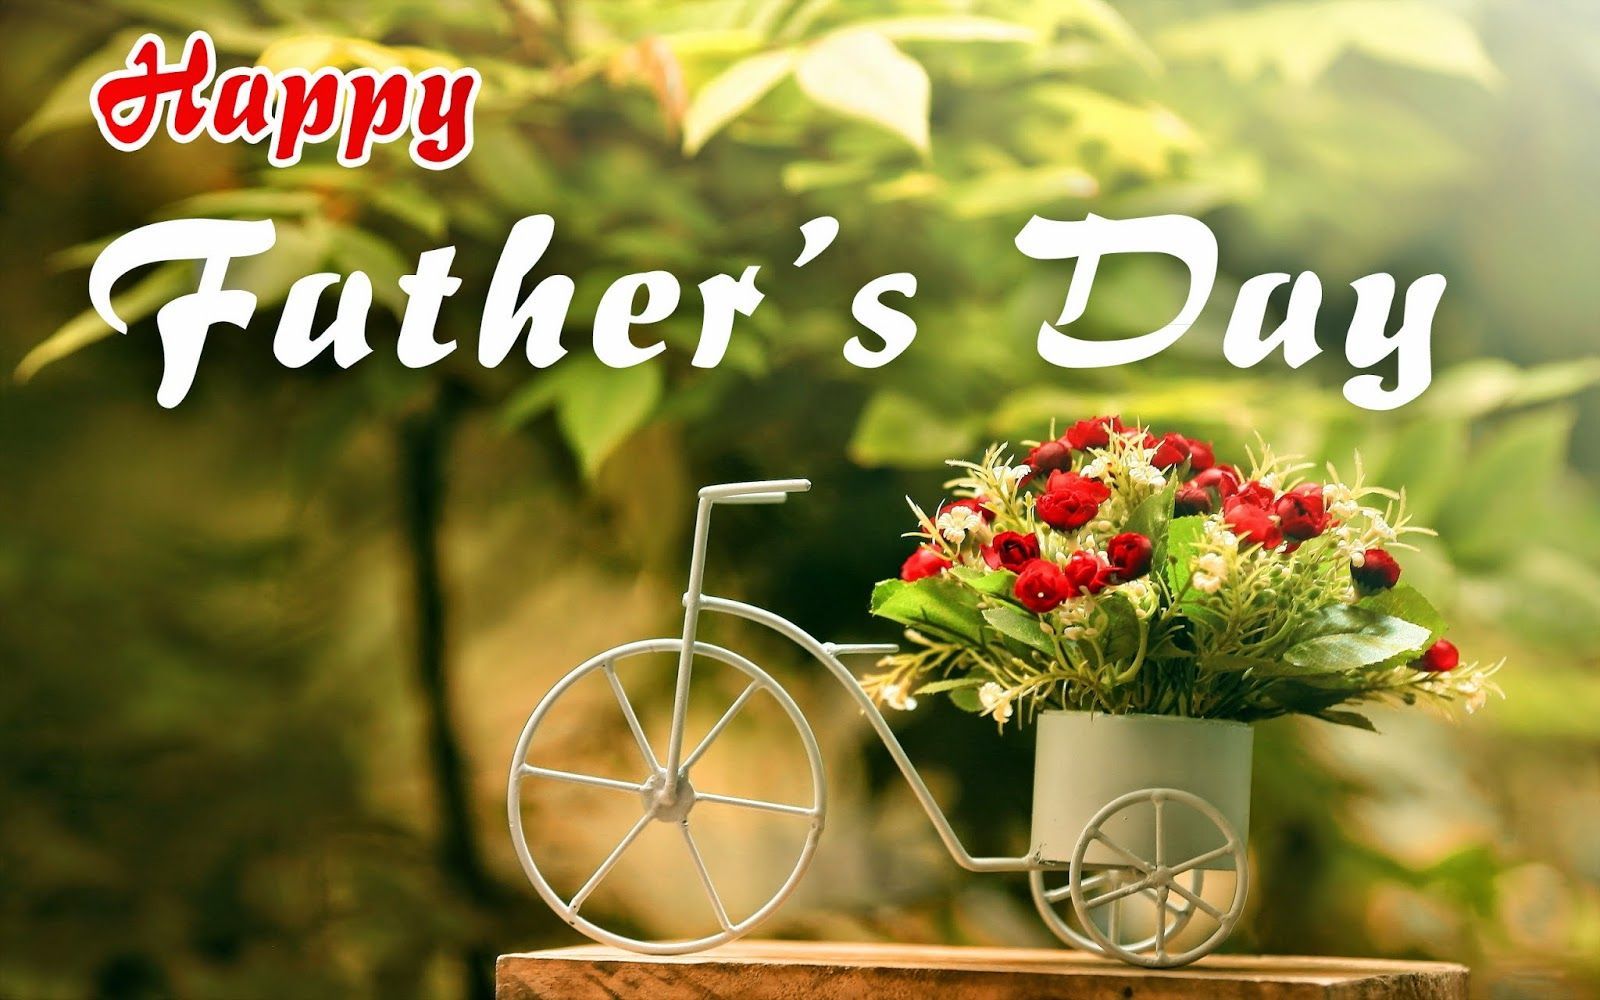 Event Planning. Happy fathers day picture, Happy fathers day image, Fathers day image